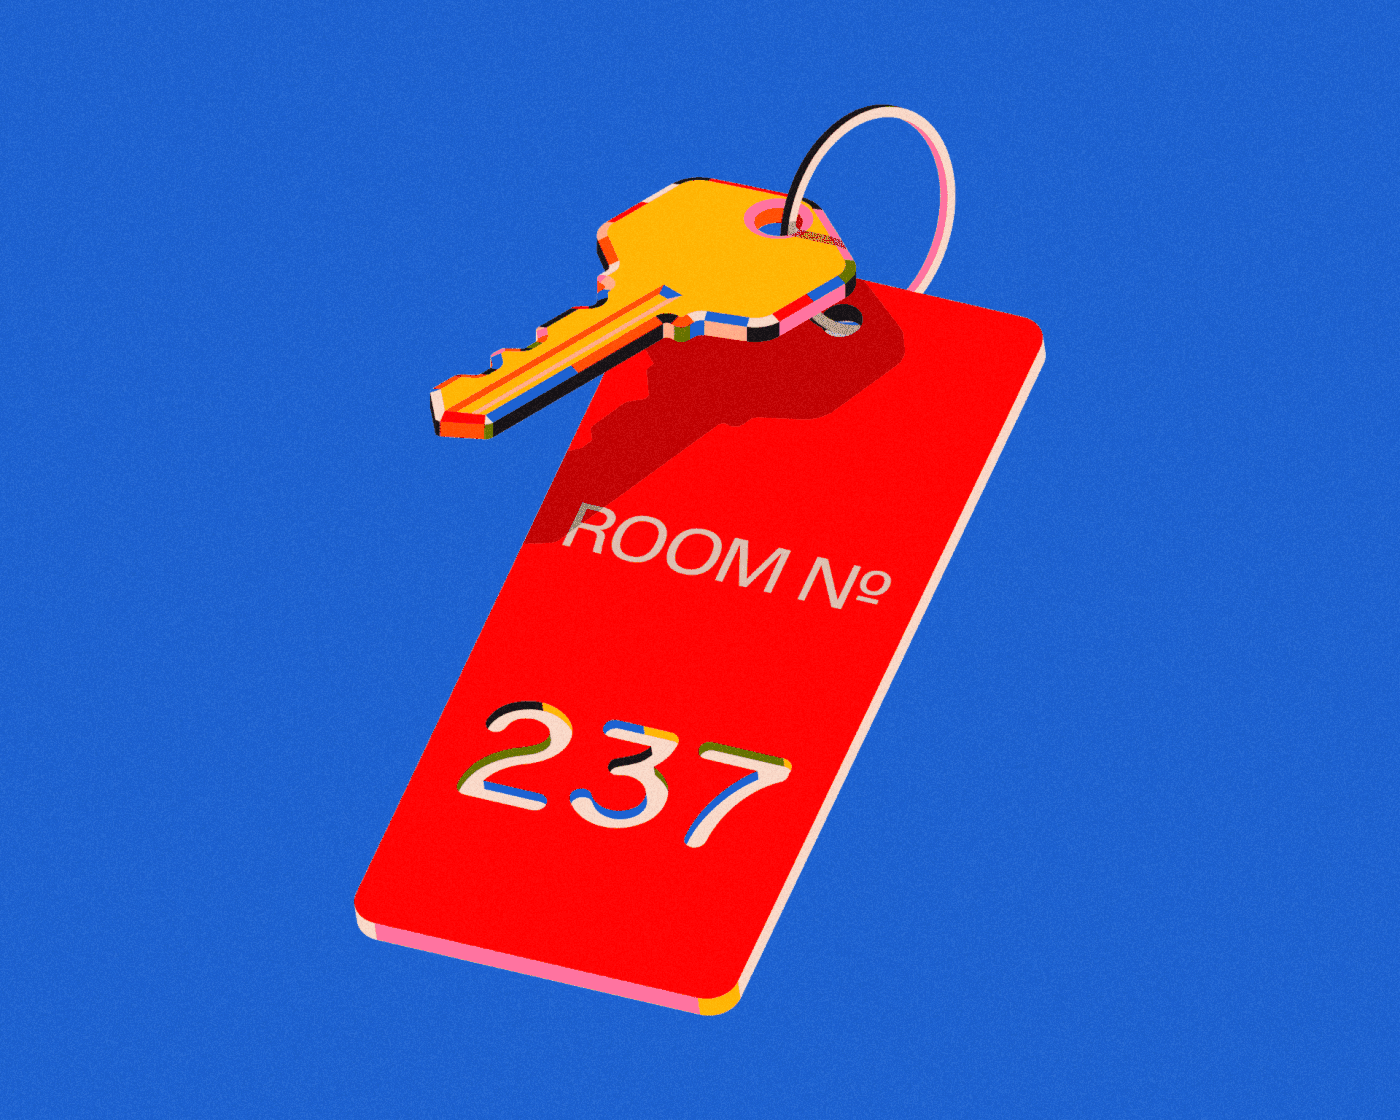 The Shining room key, enter at your own risk.